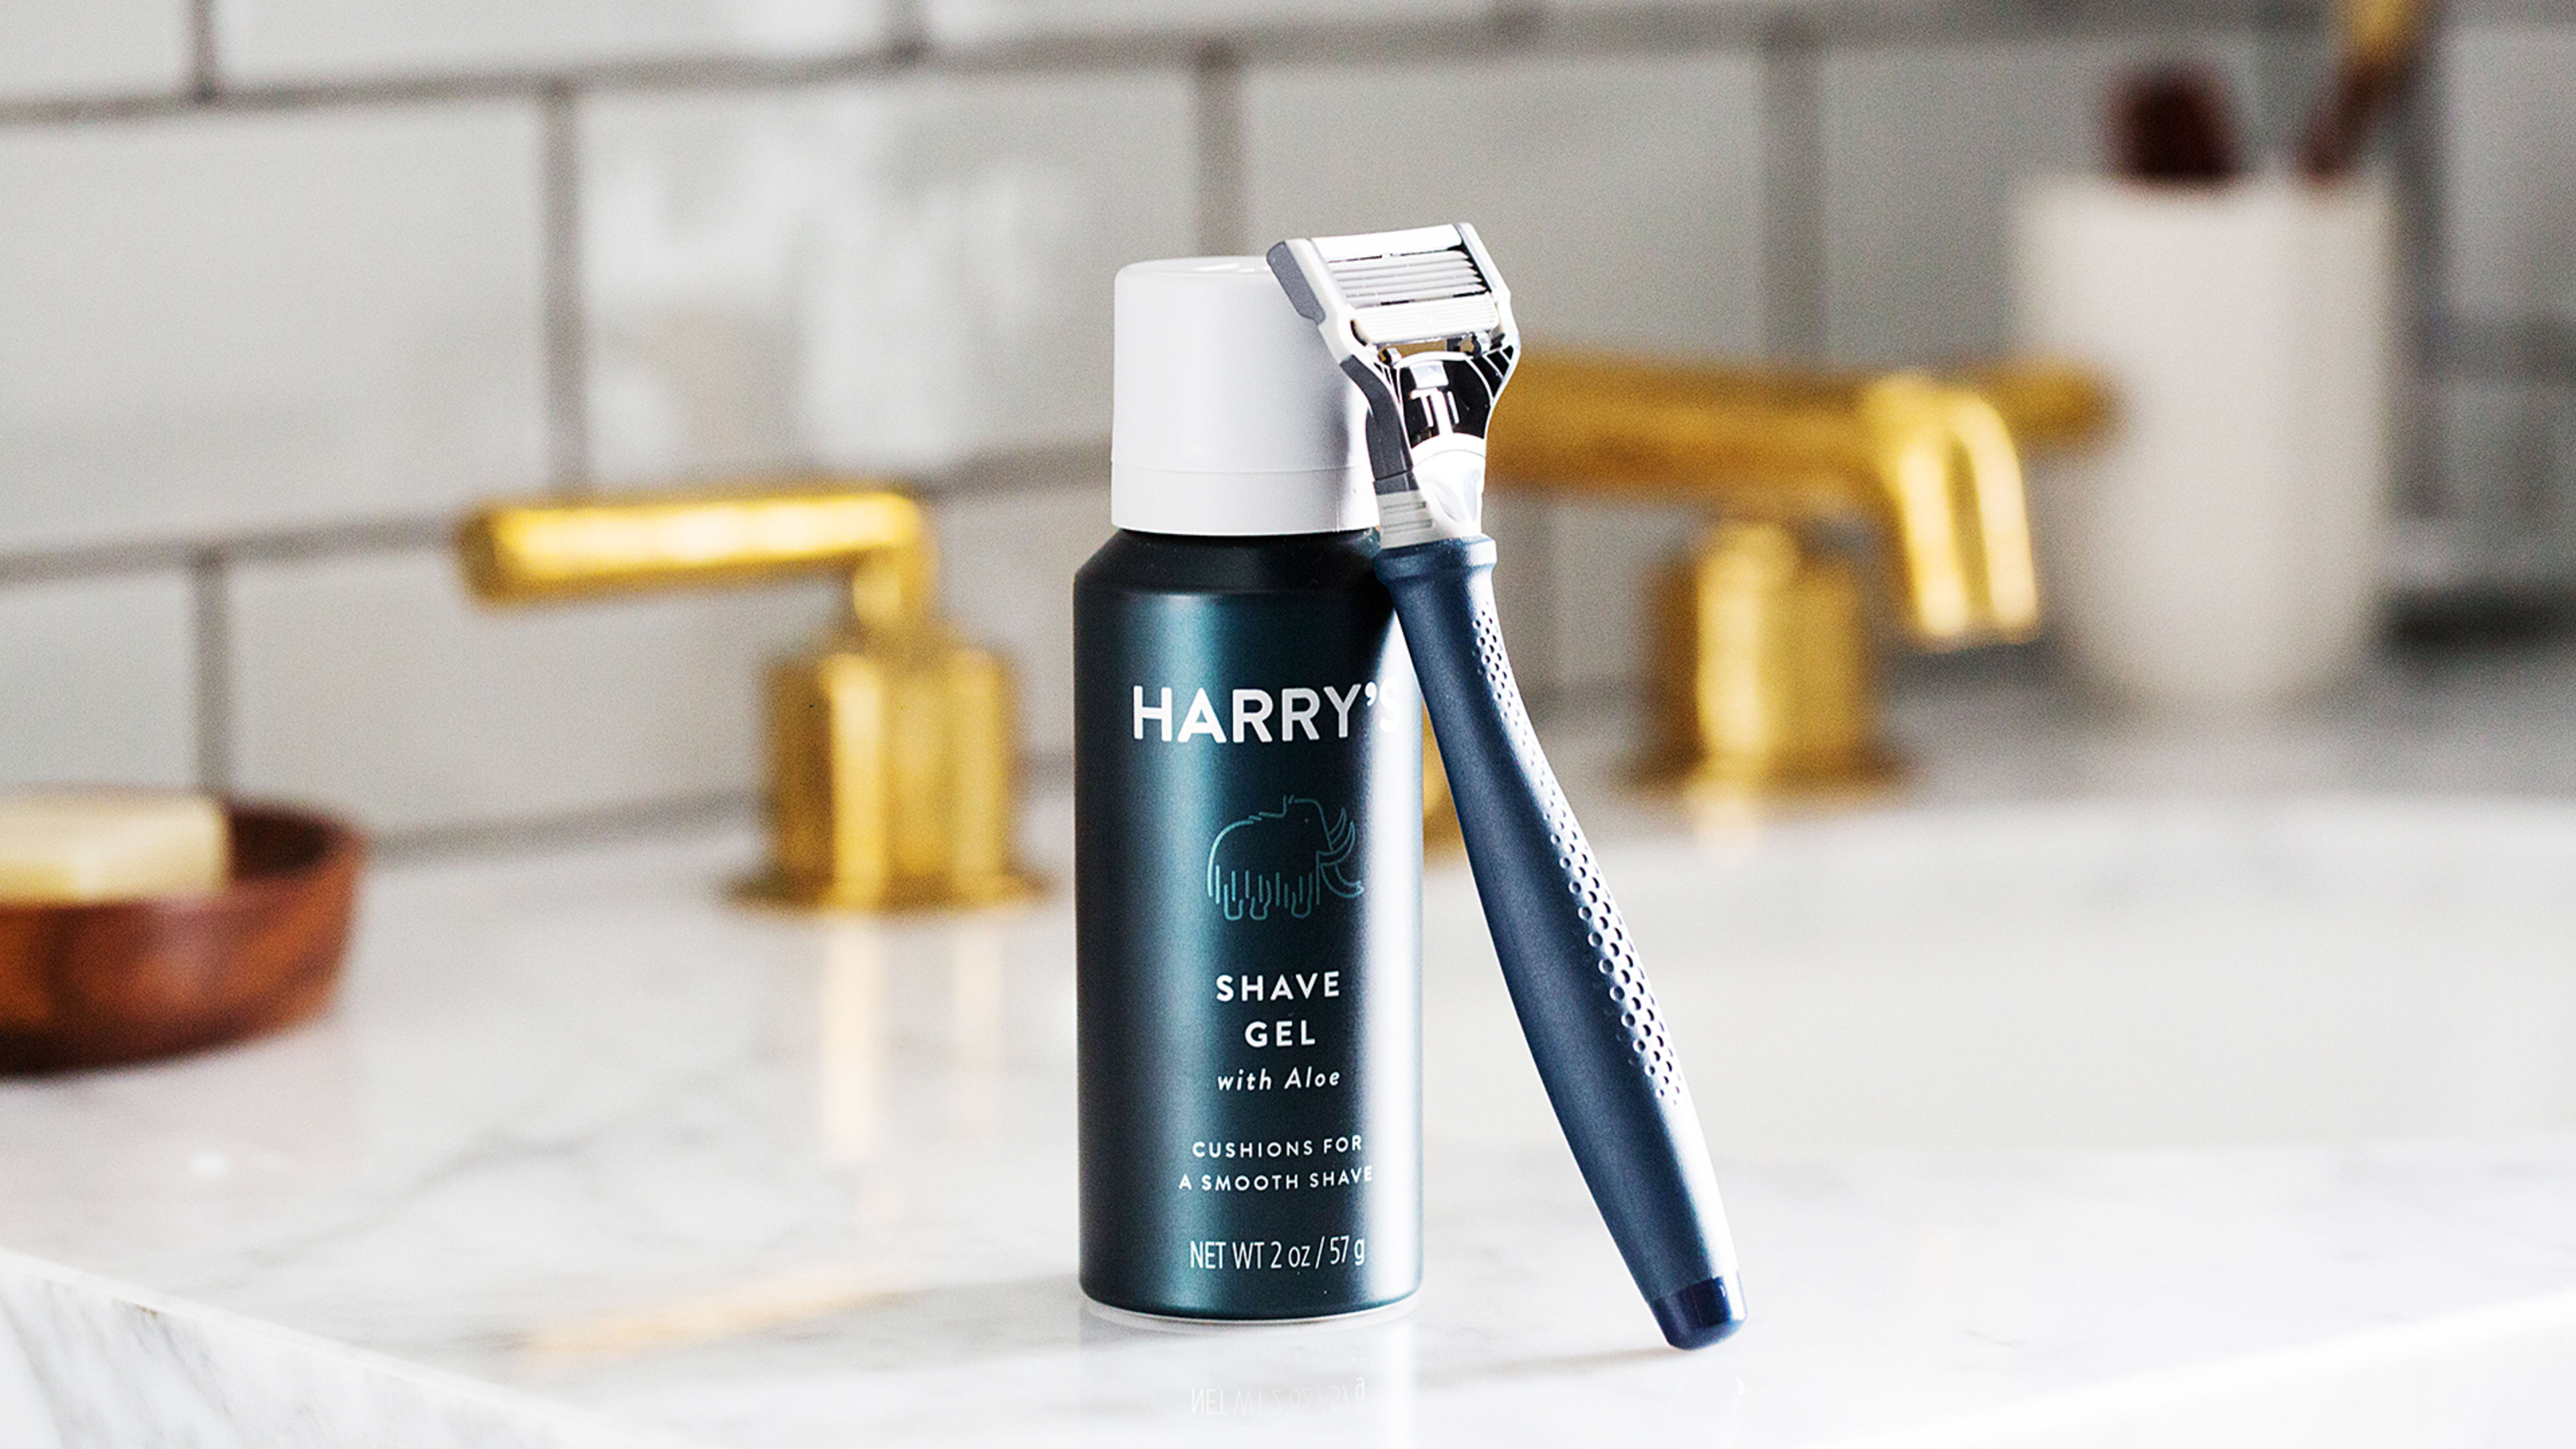 Soon available at Walmart, Harry’s is giving Gillette a run for its money